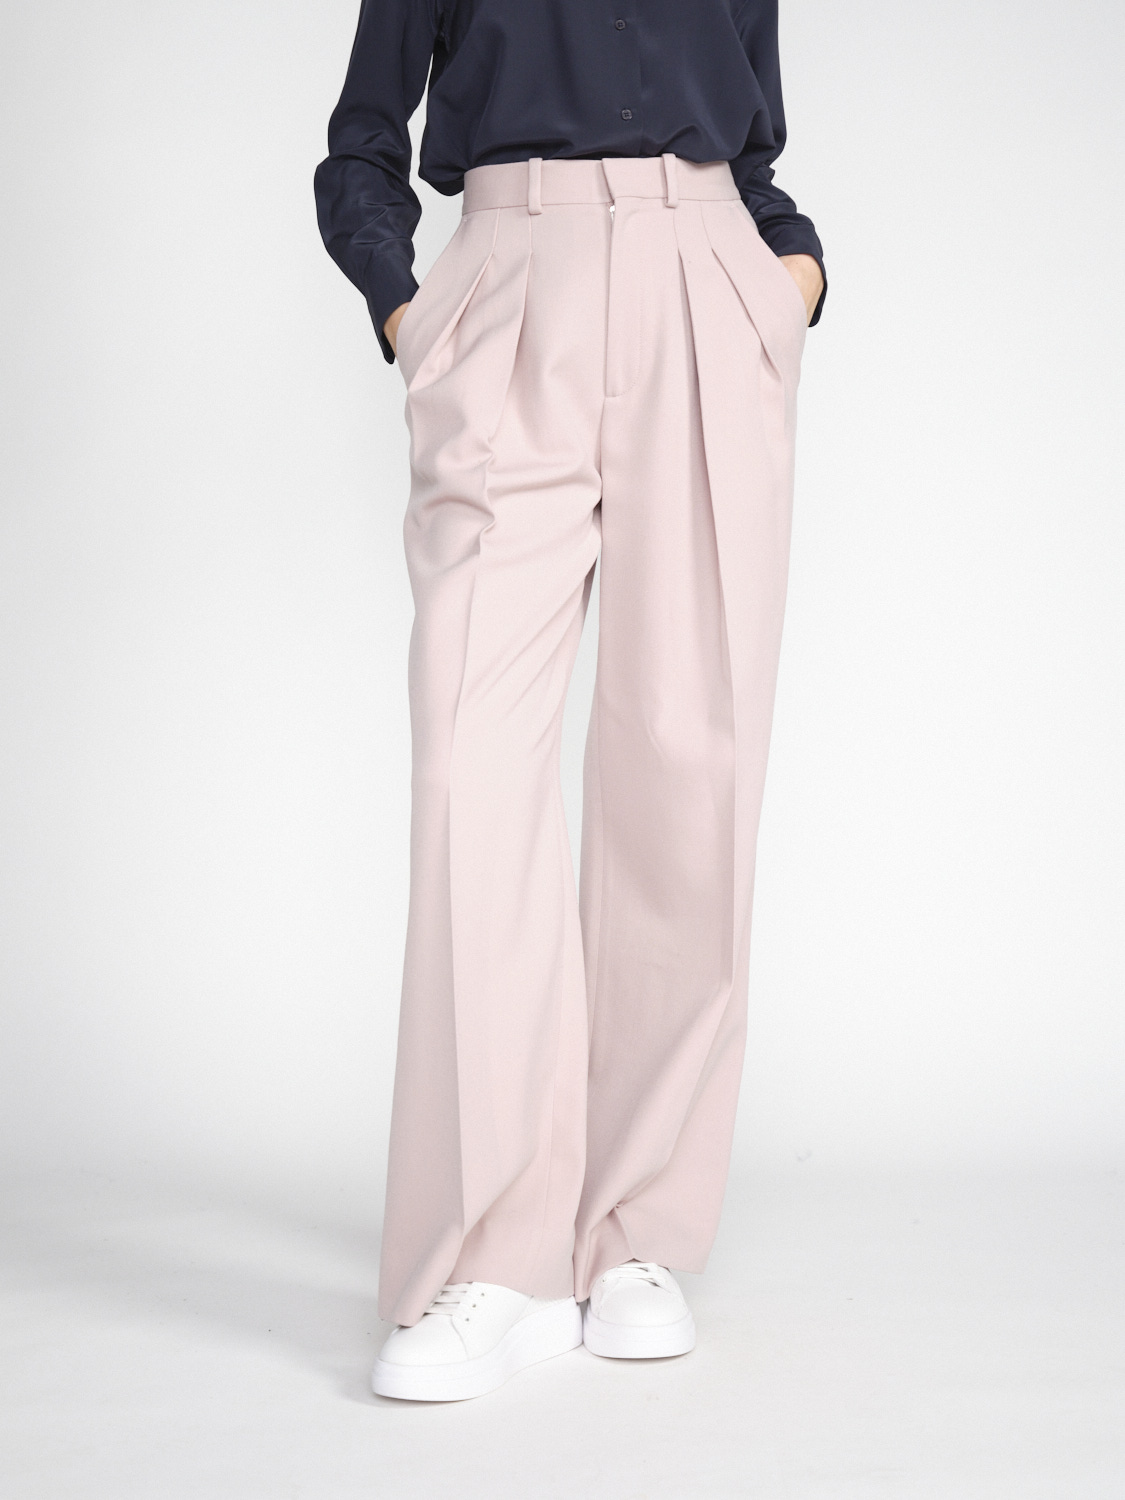 Victoria Beckham Double Pleat Trouser - Pleated trousers in virgin wool mix  rose 34